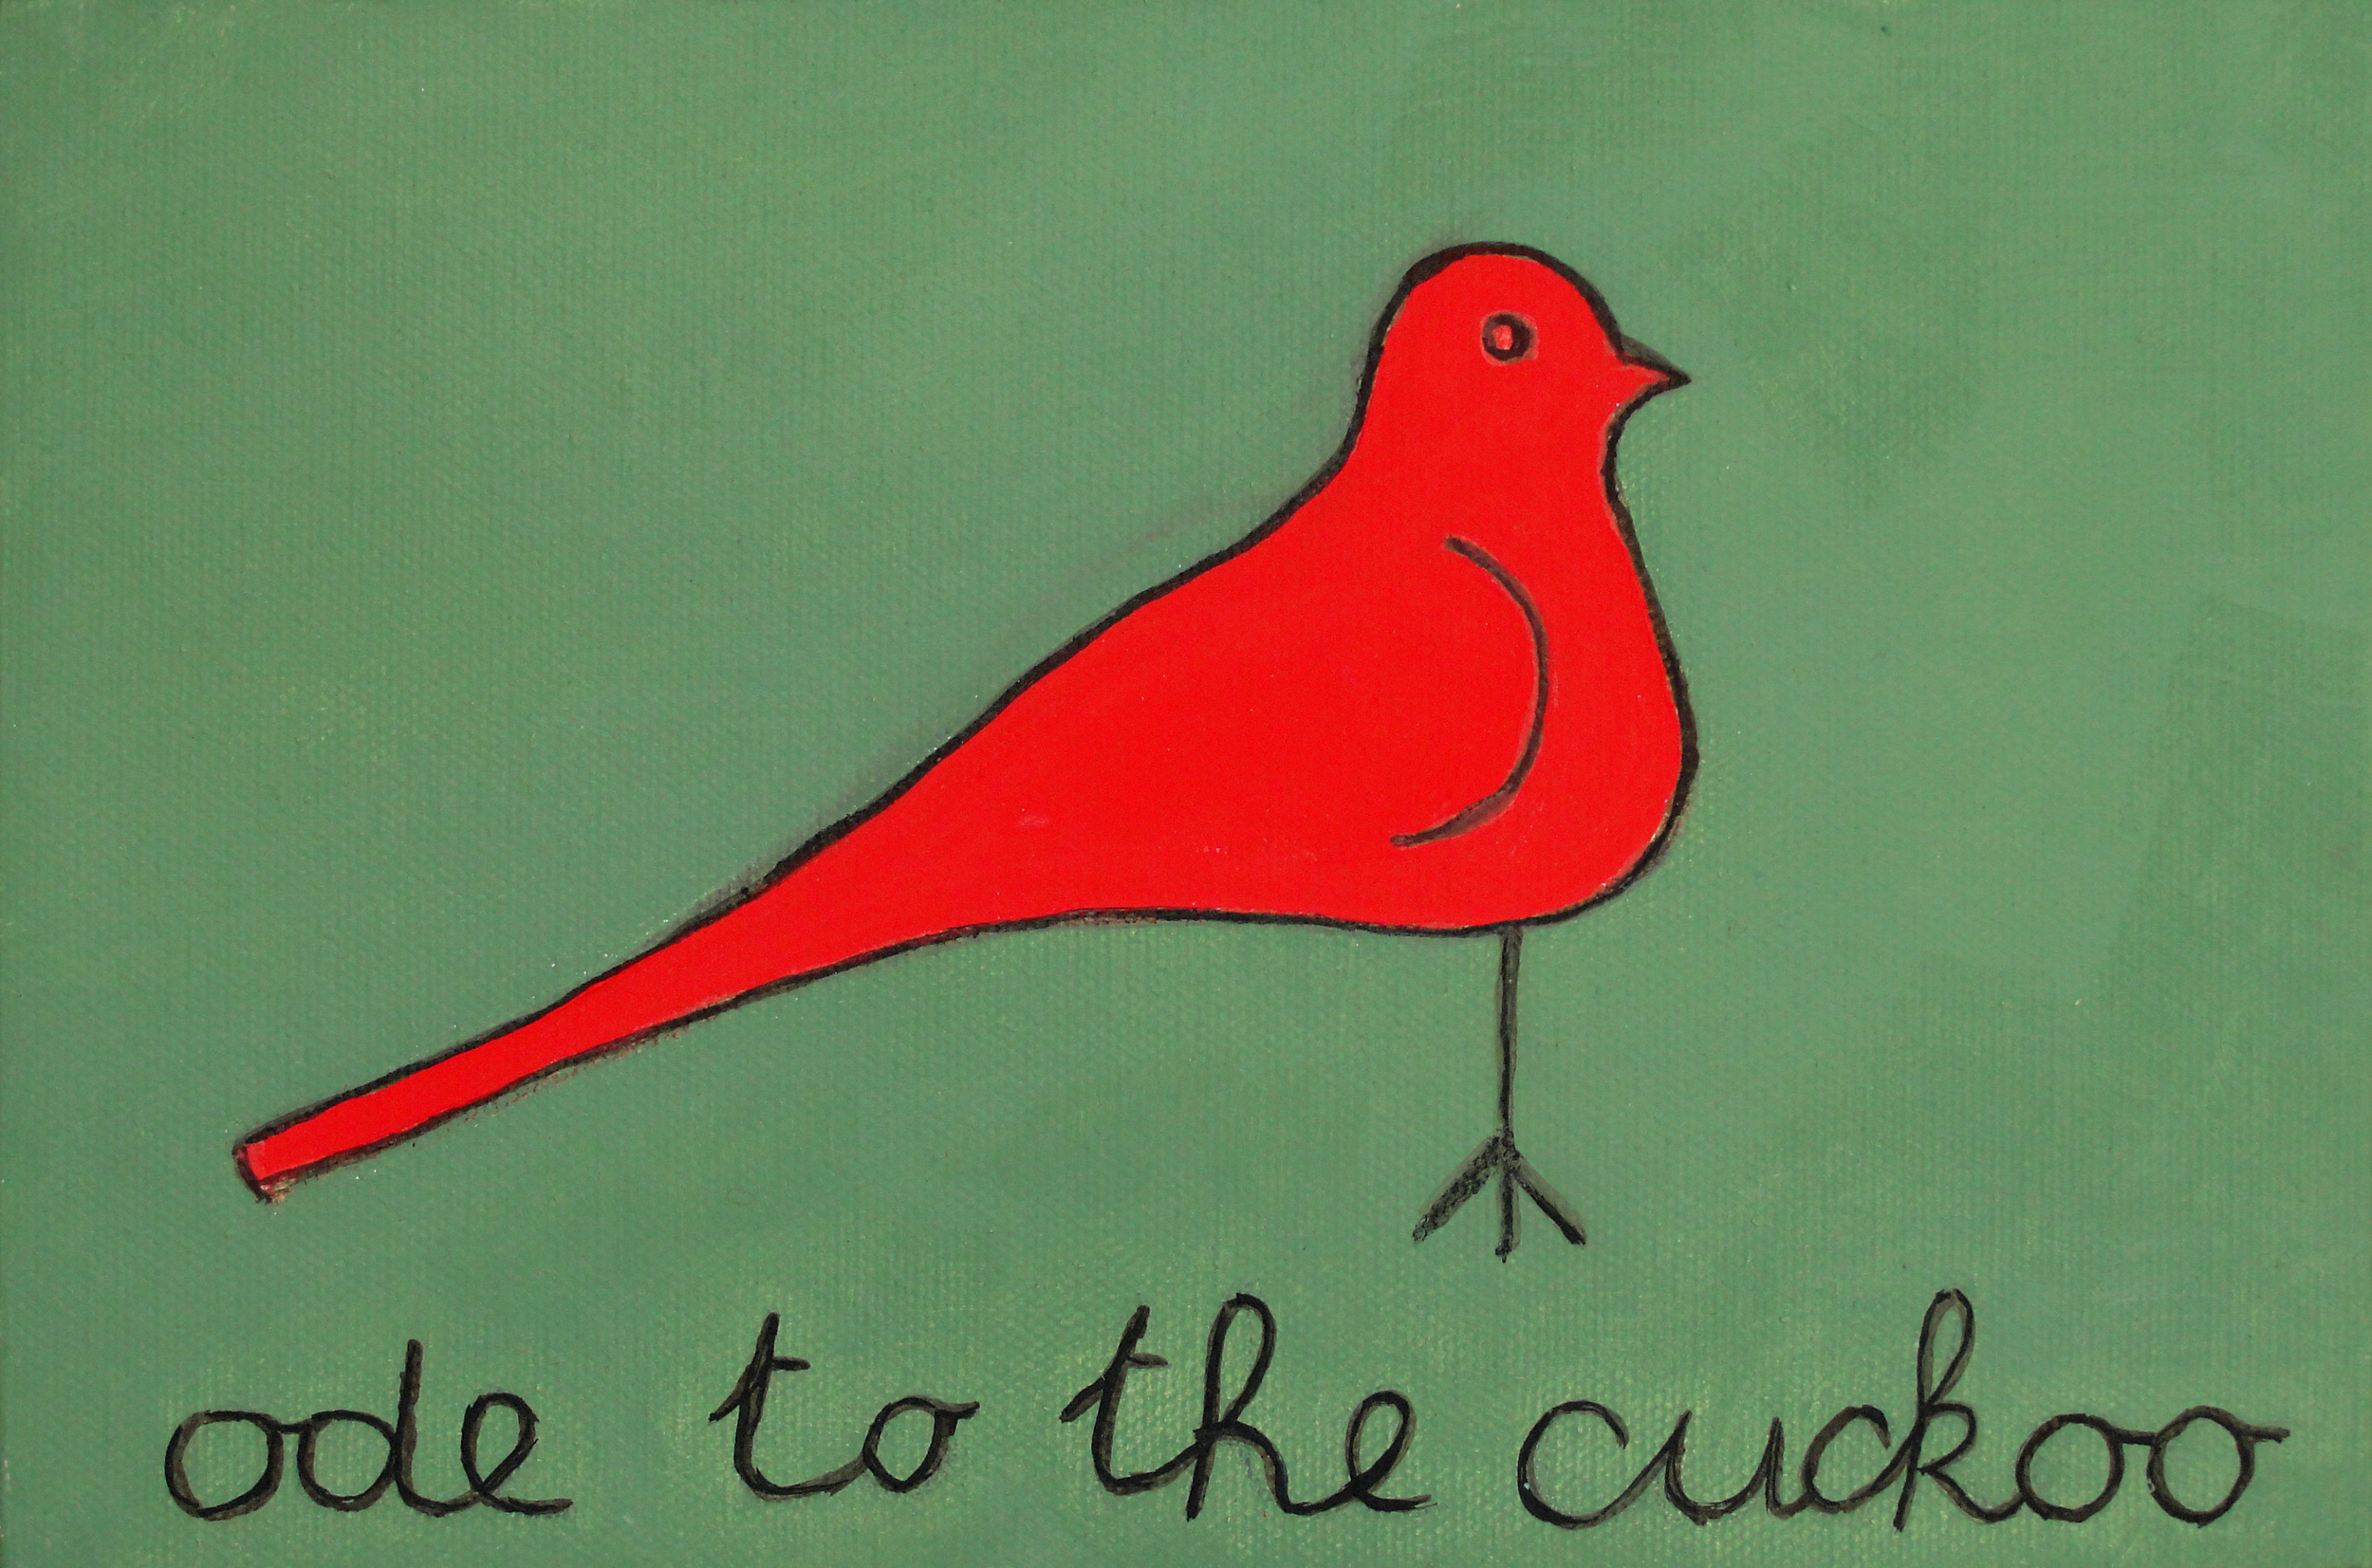   Ode to the Cuckoo  (2011), 6 x 9 in, oil on canvas   